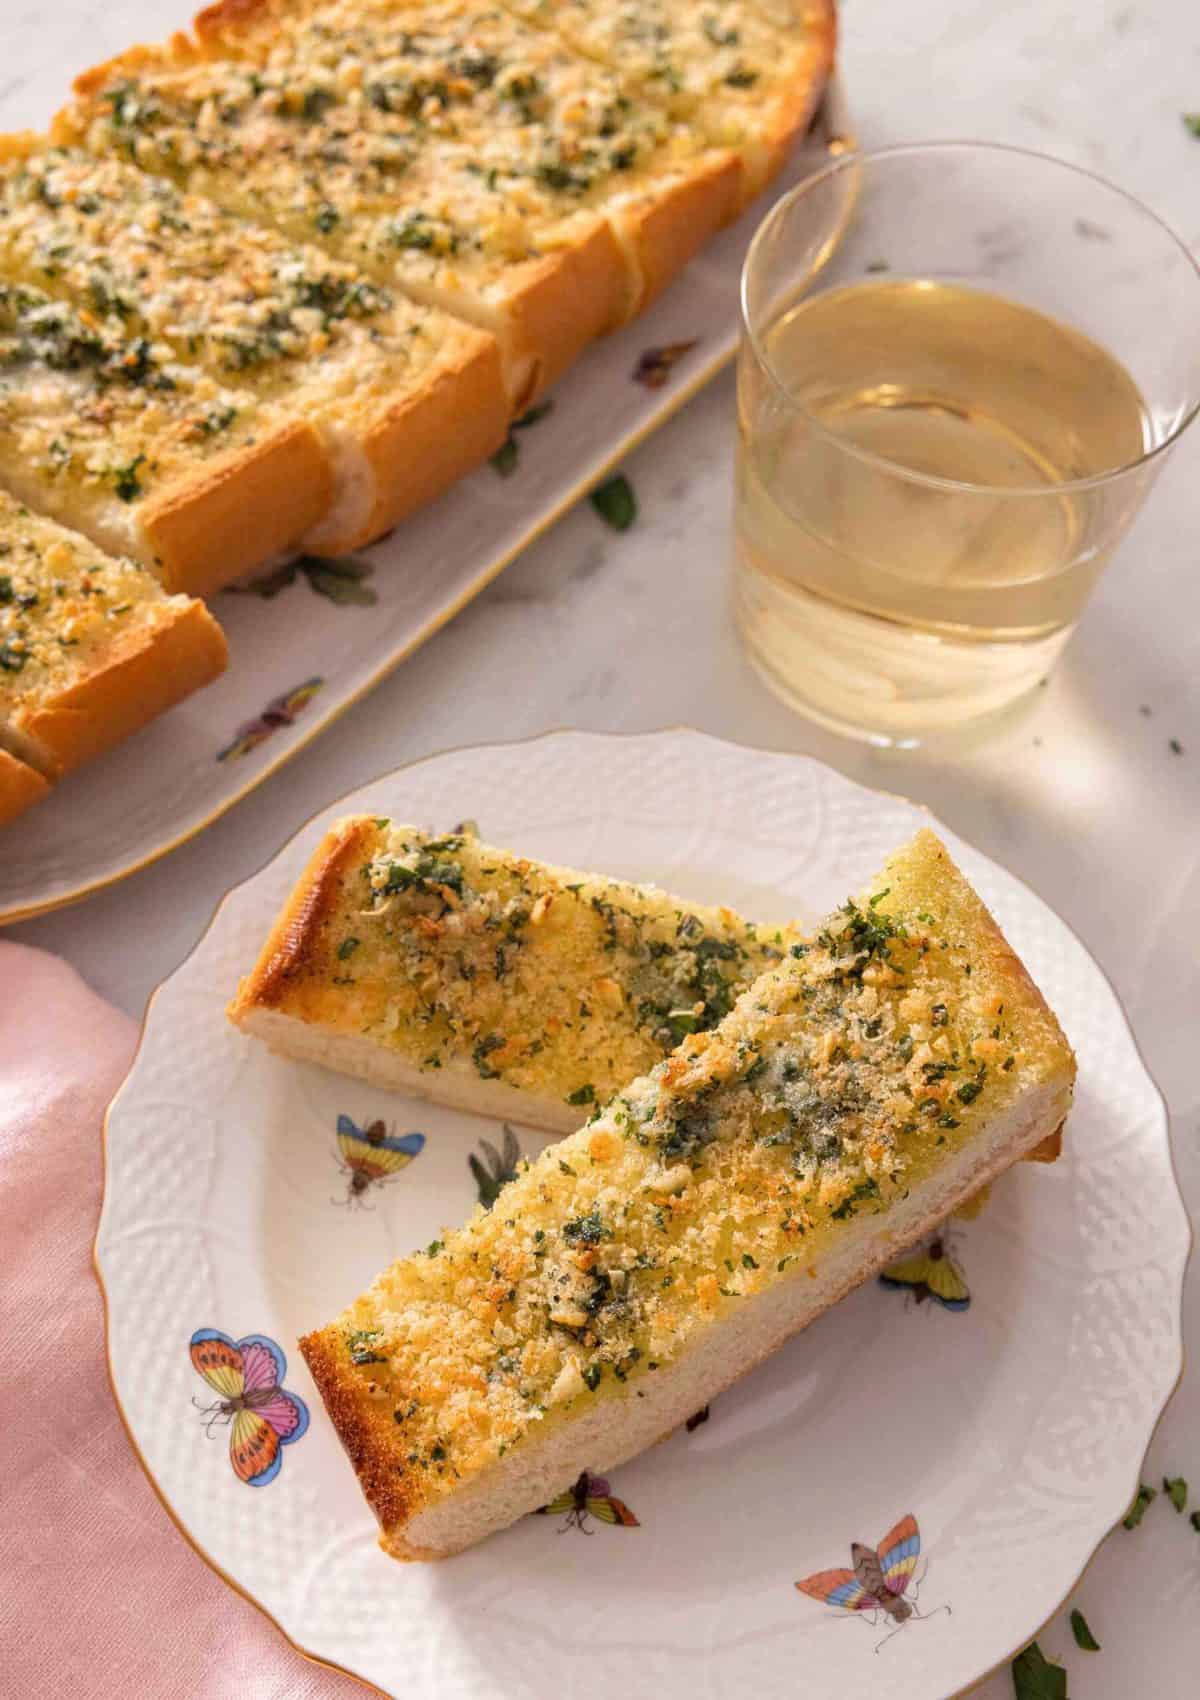 A plate with two pieces of garlic bread by a glass of wine.